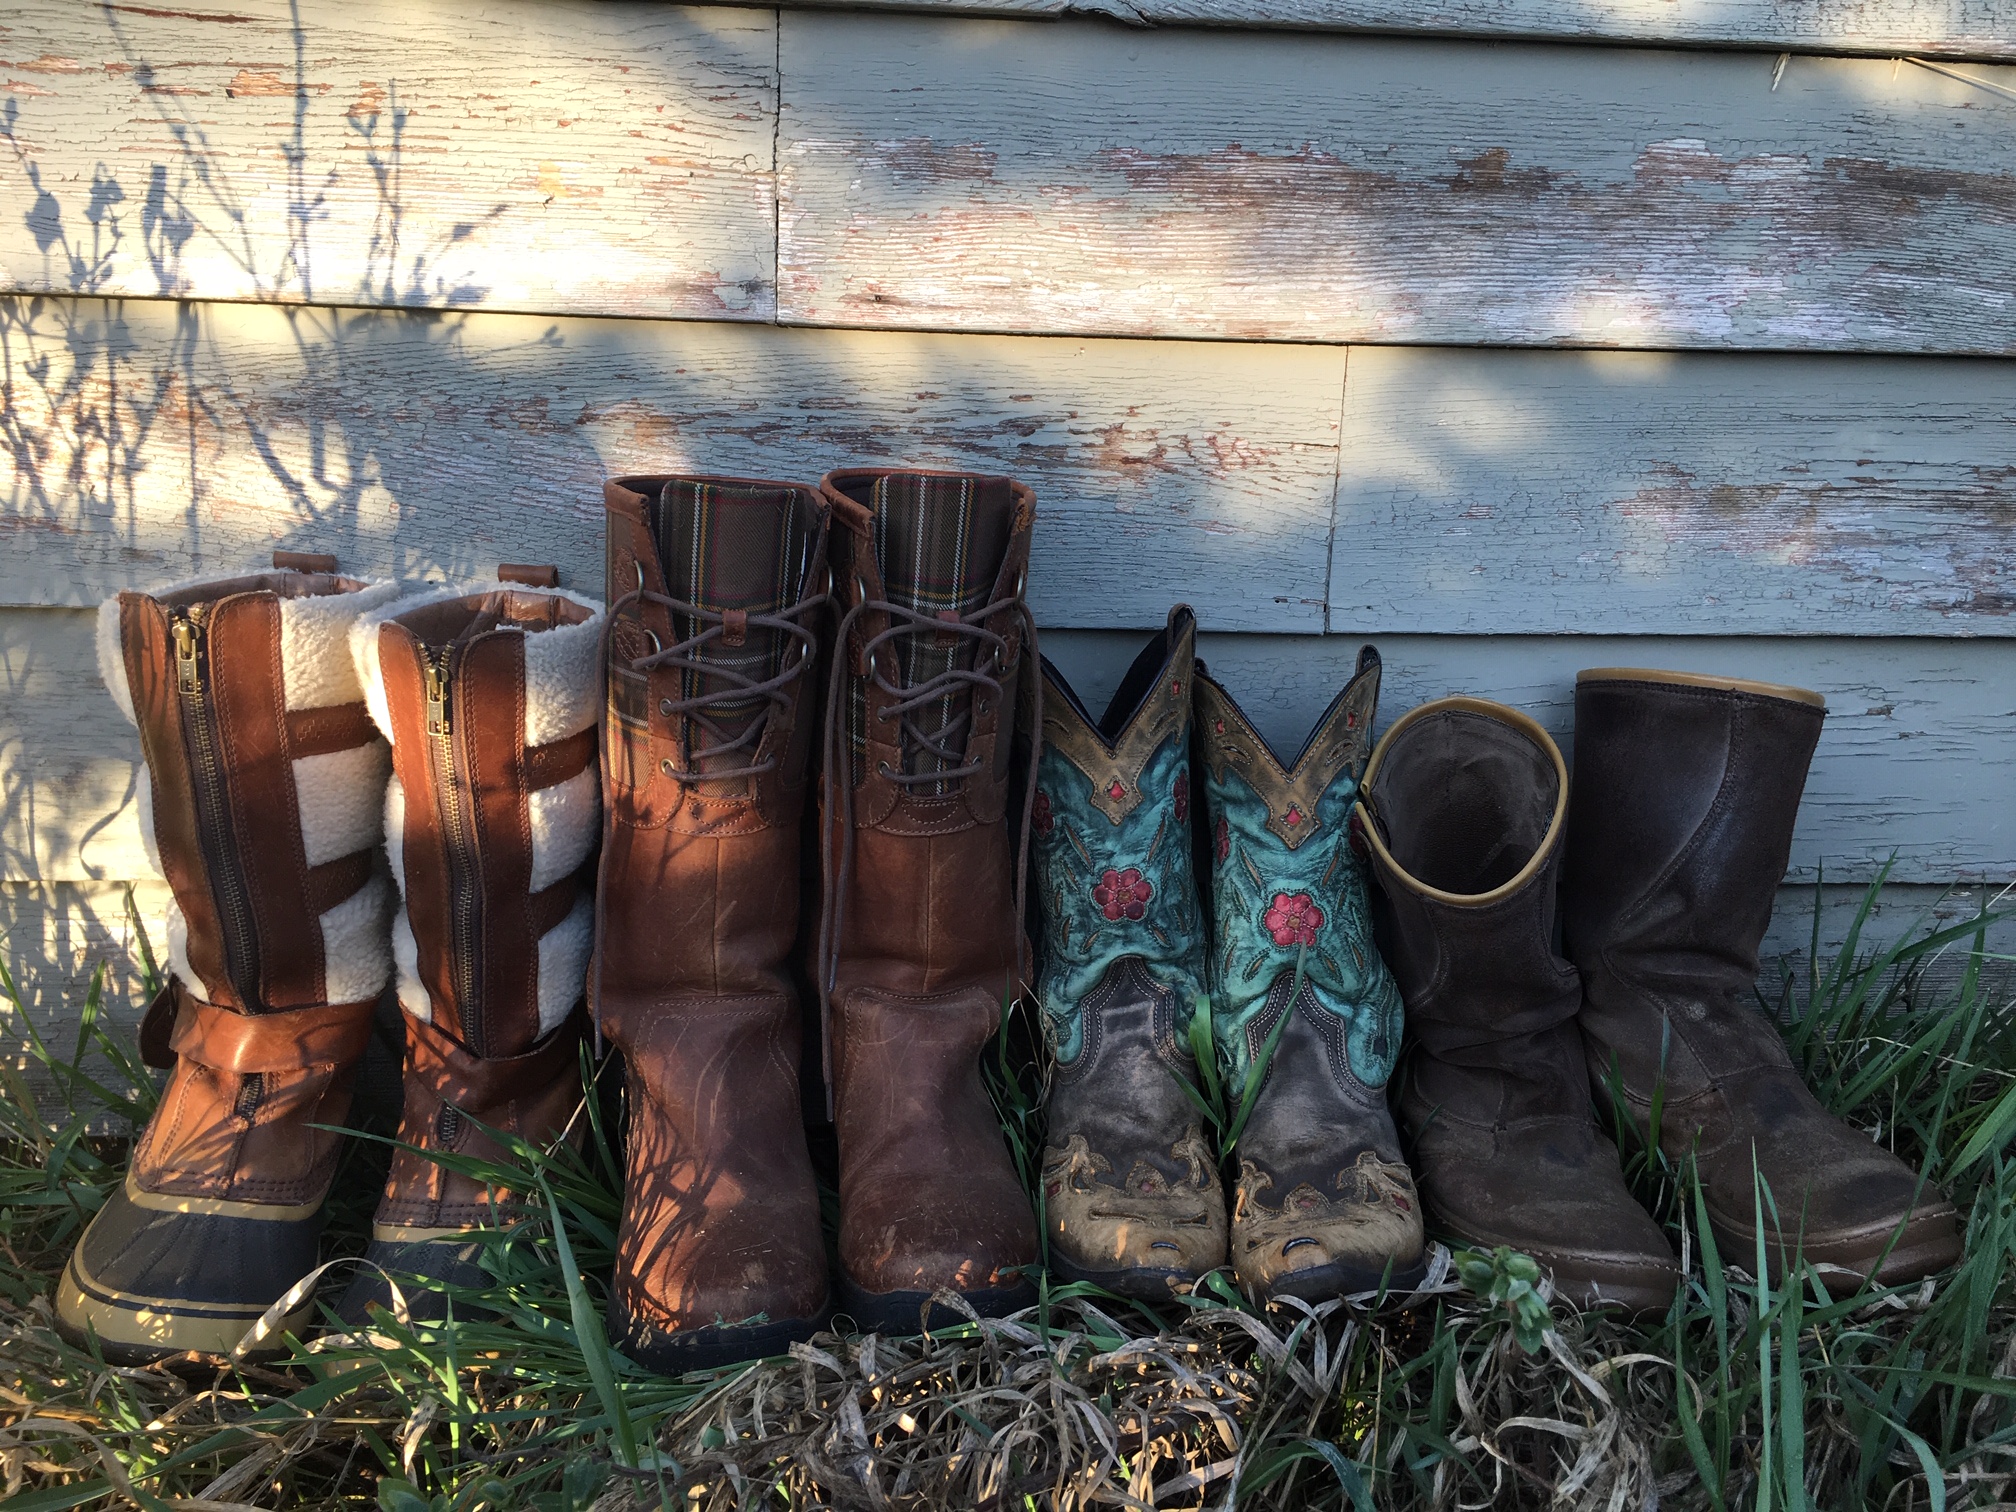 If the boot fits, a life in shoes